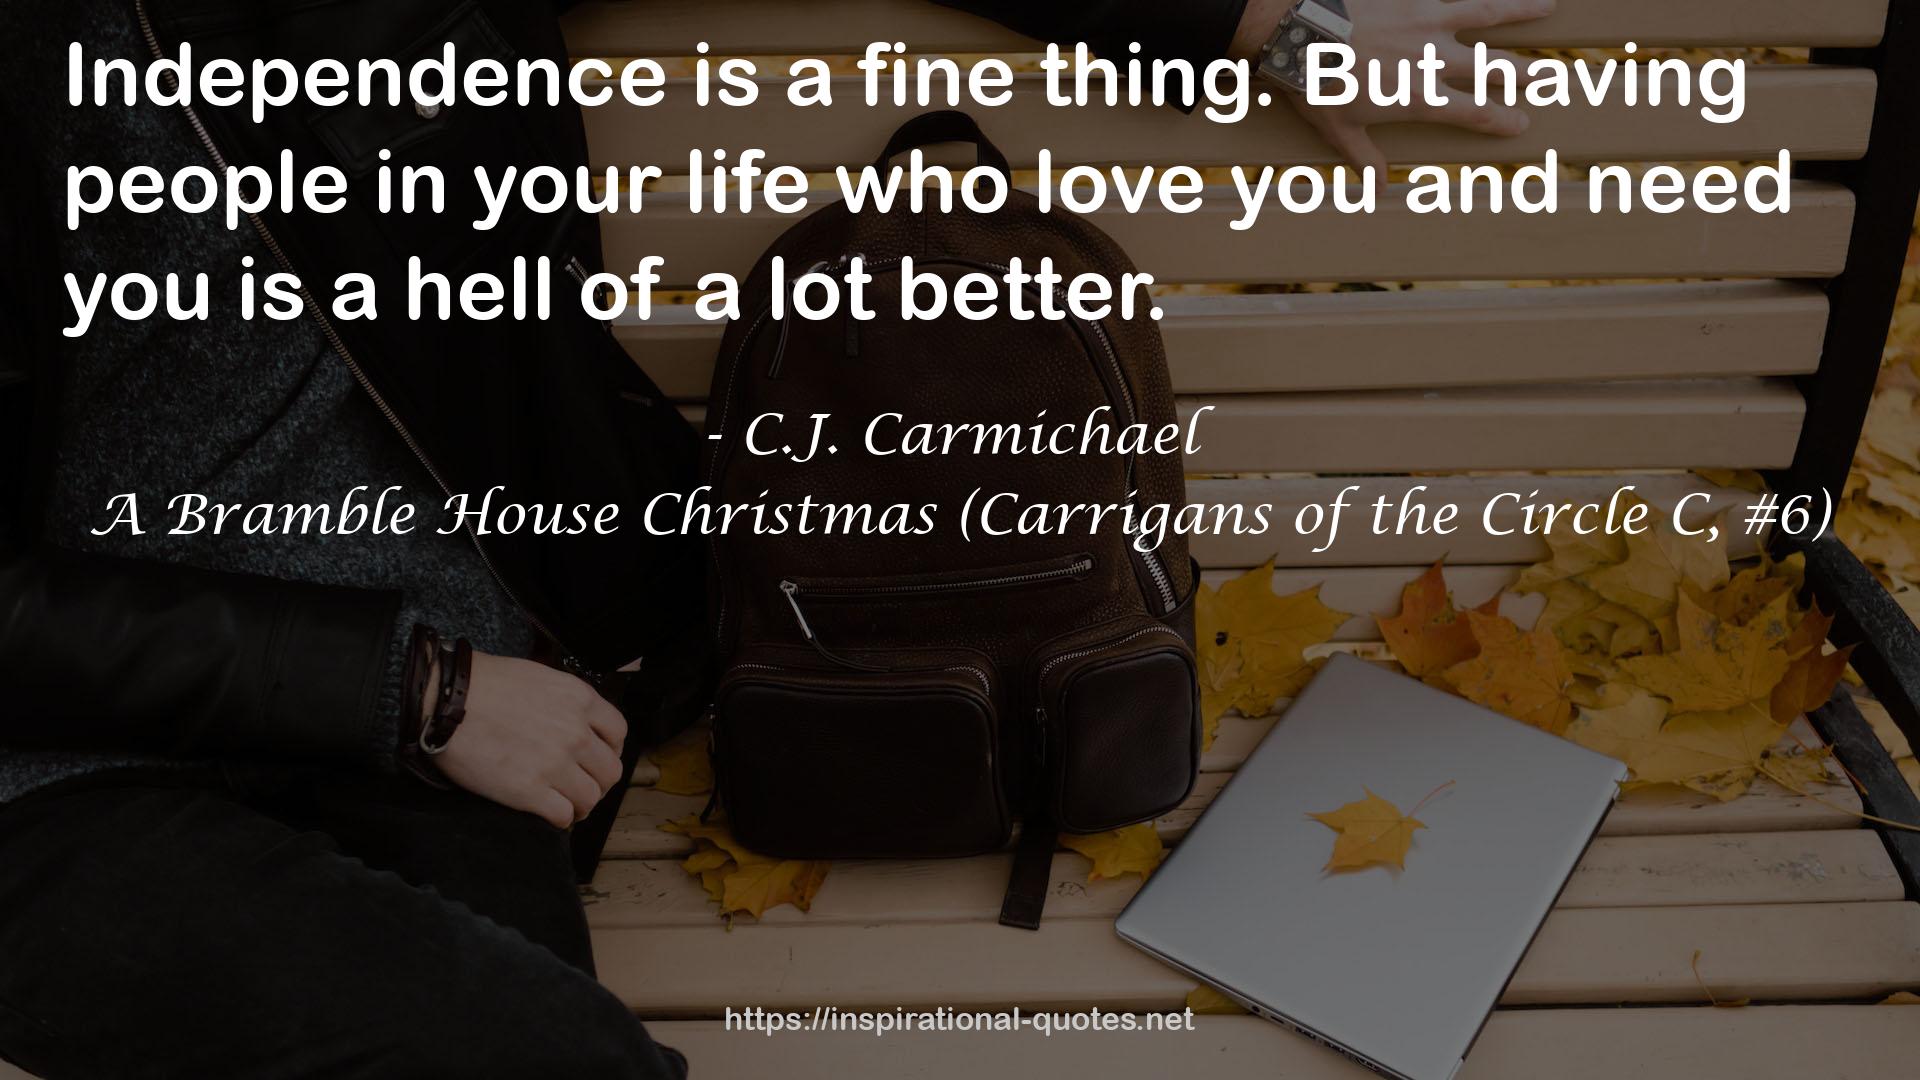 A Bramble House Christmas (Carrigans of the Circle C, #6) QUOTES